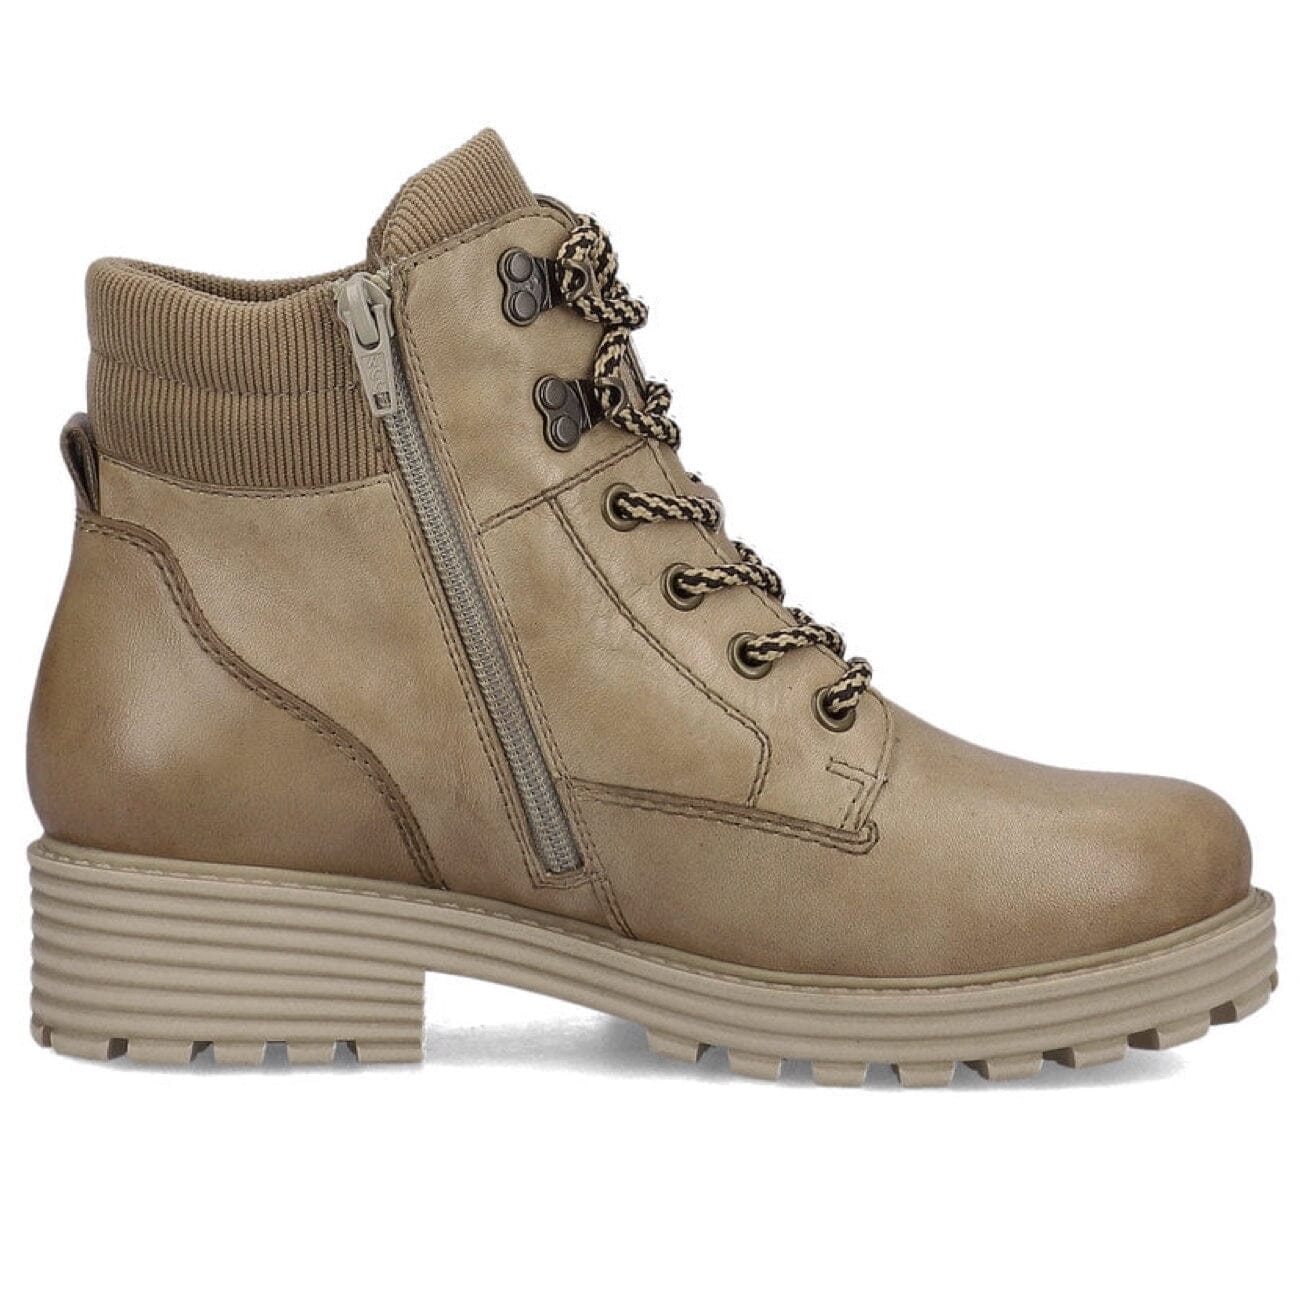 Remonte, DOW75-20, Boot, Leather, Taupe-Mushroom Boots Remonte Taupe-Mushroom 37 